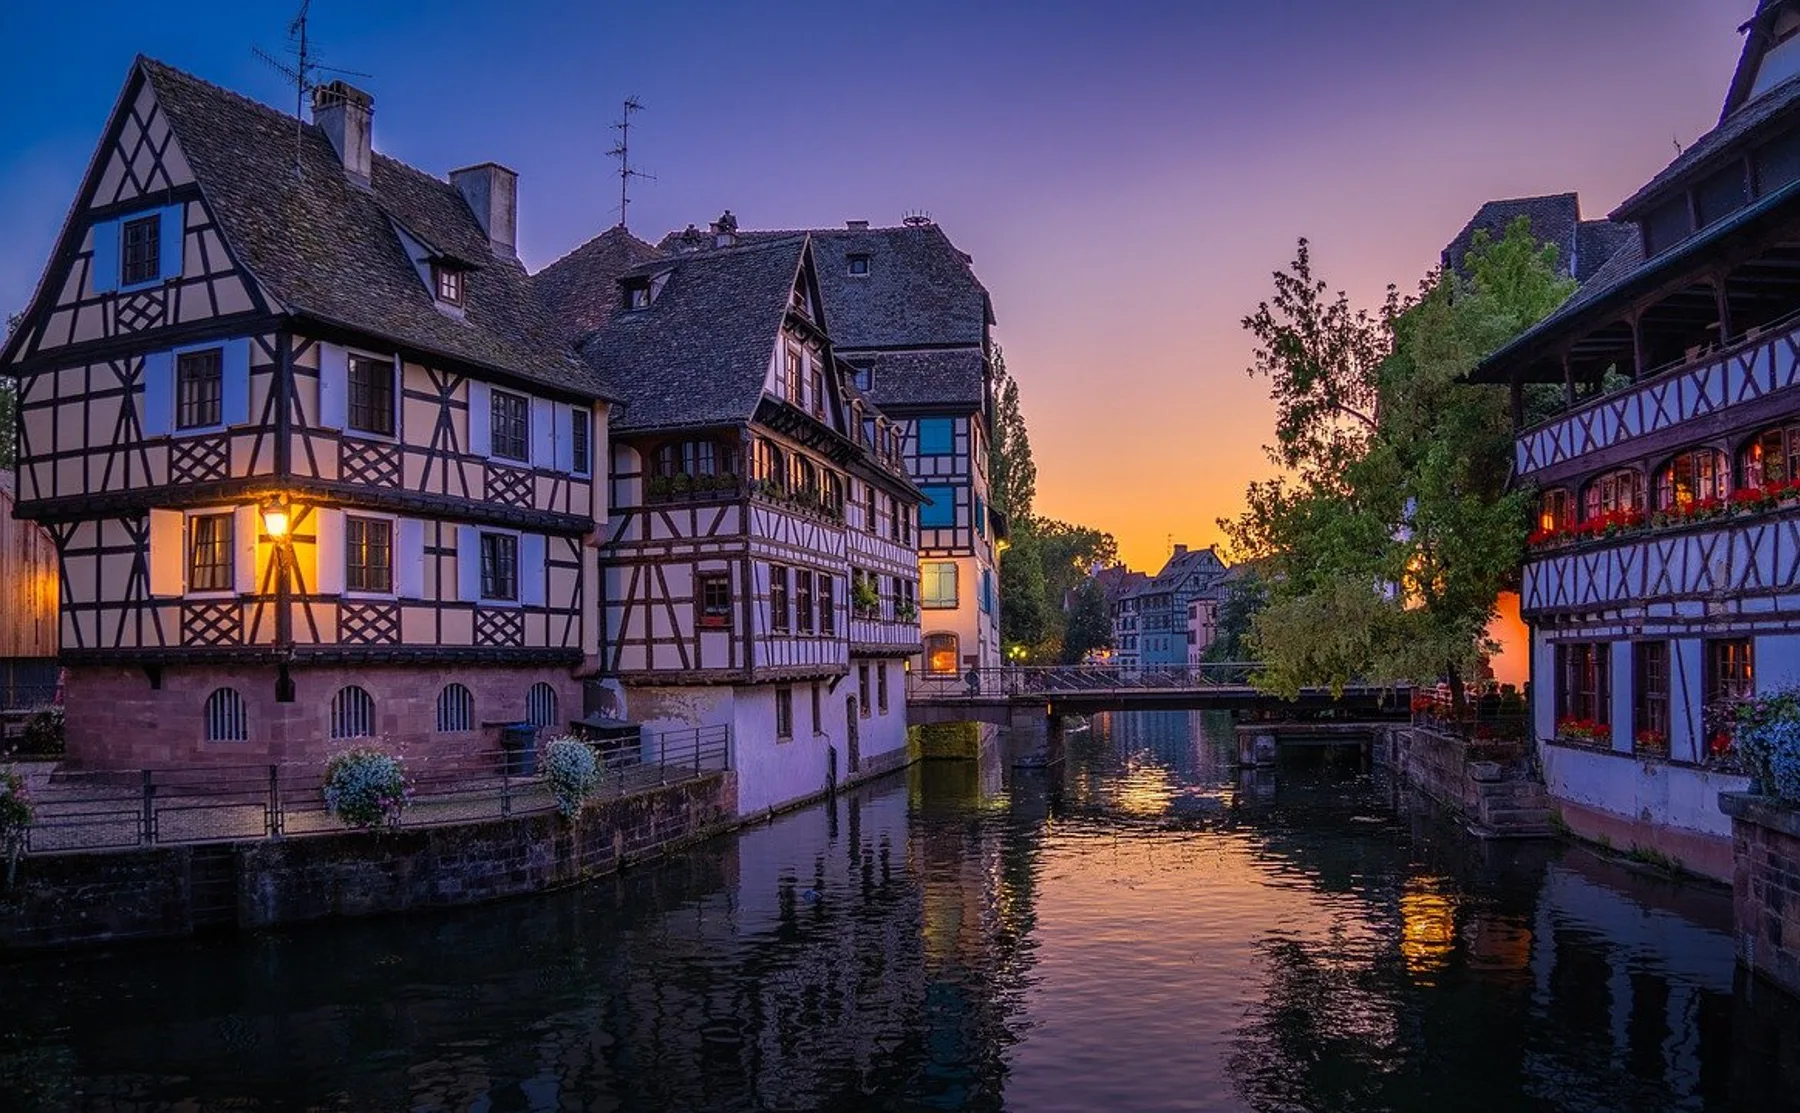 Strasbourg Dinner All Inclusive Food & History Tour With Local Expert - 1547492